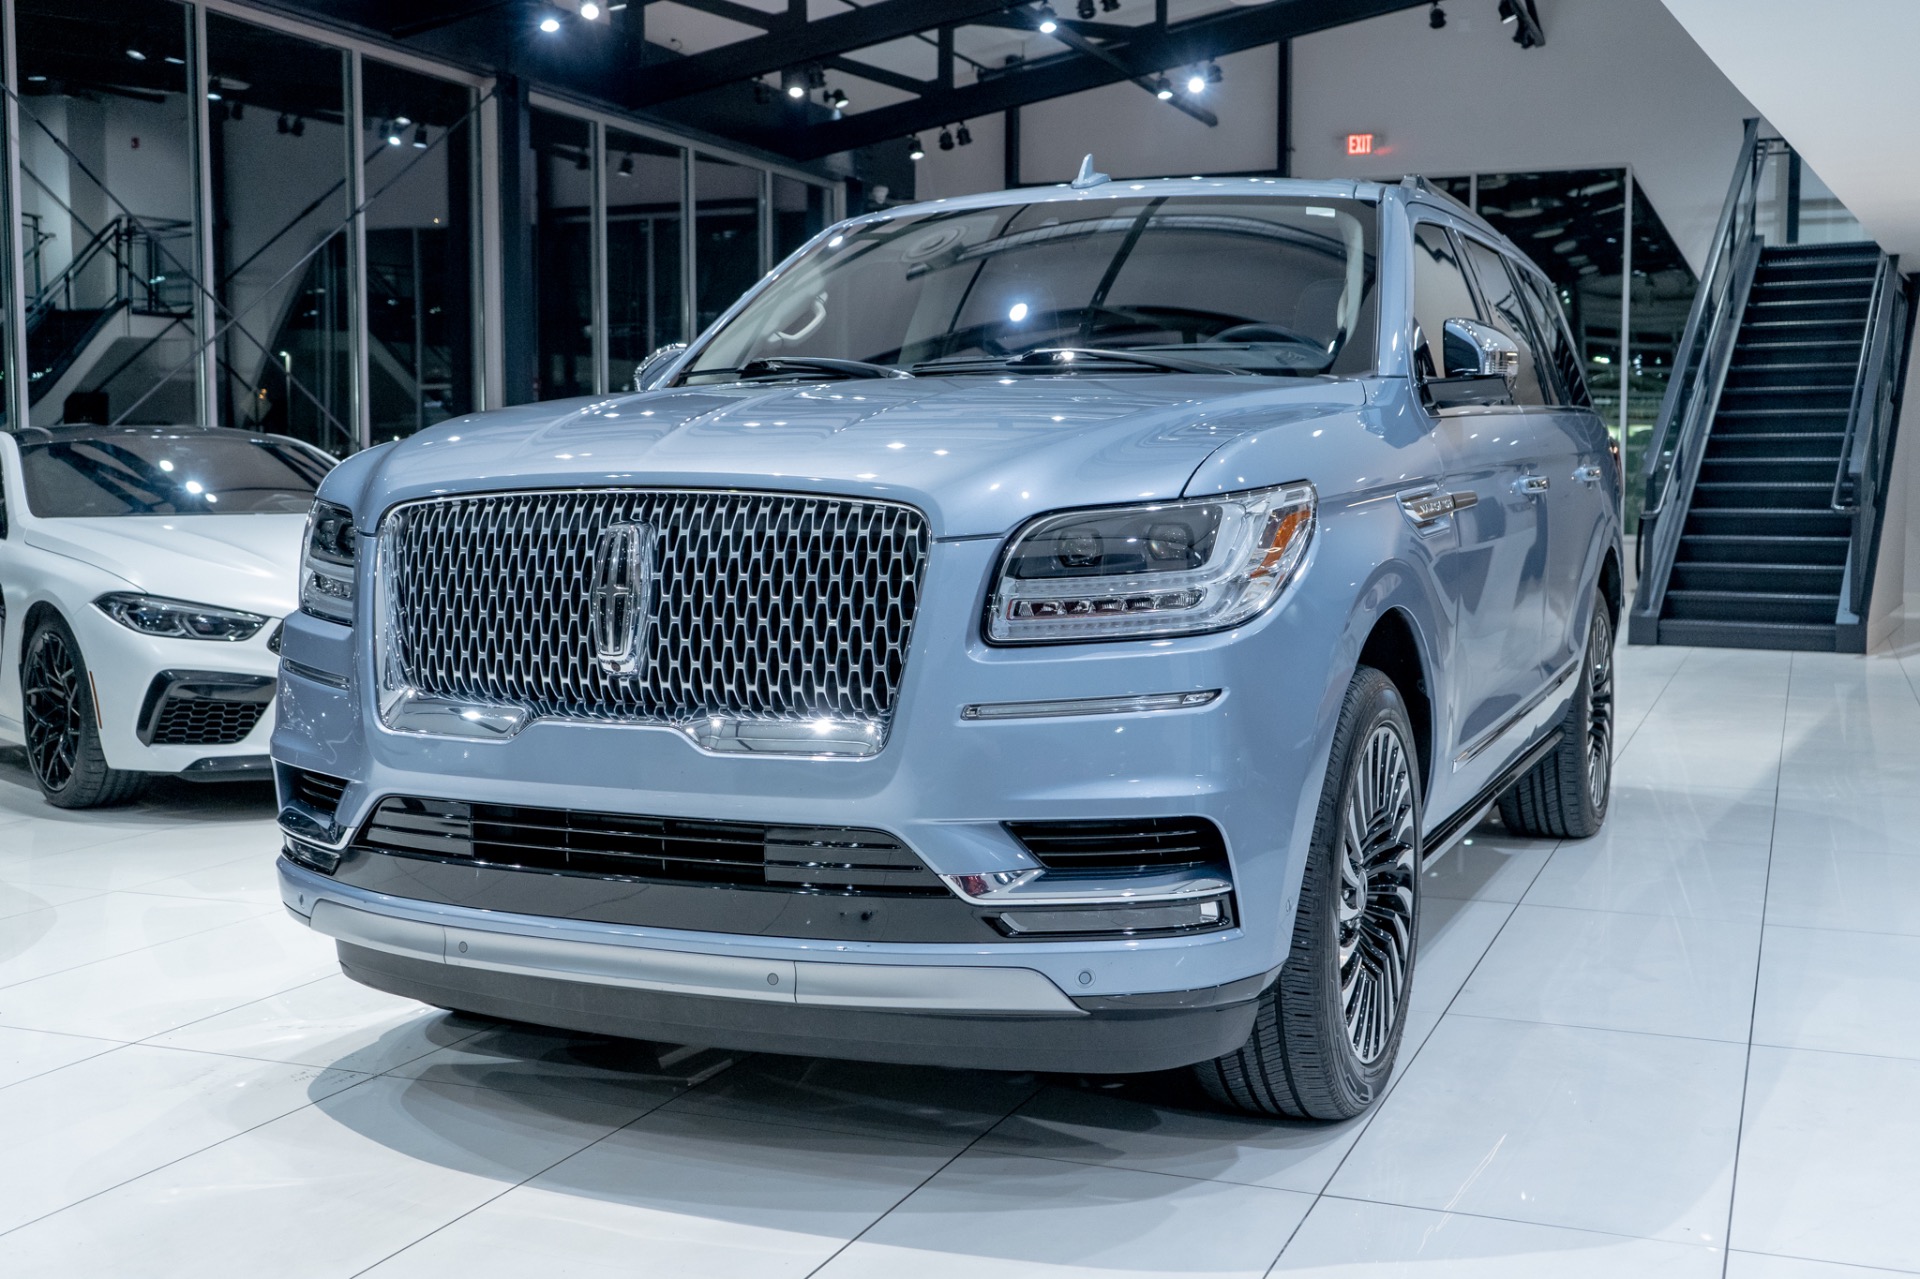 Used-2018-Lincoln-Navigator-Black-Label-SUV-Top-of-the-Line-Model-SUPER-Luxurious-3-Row-SUV